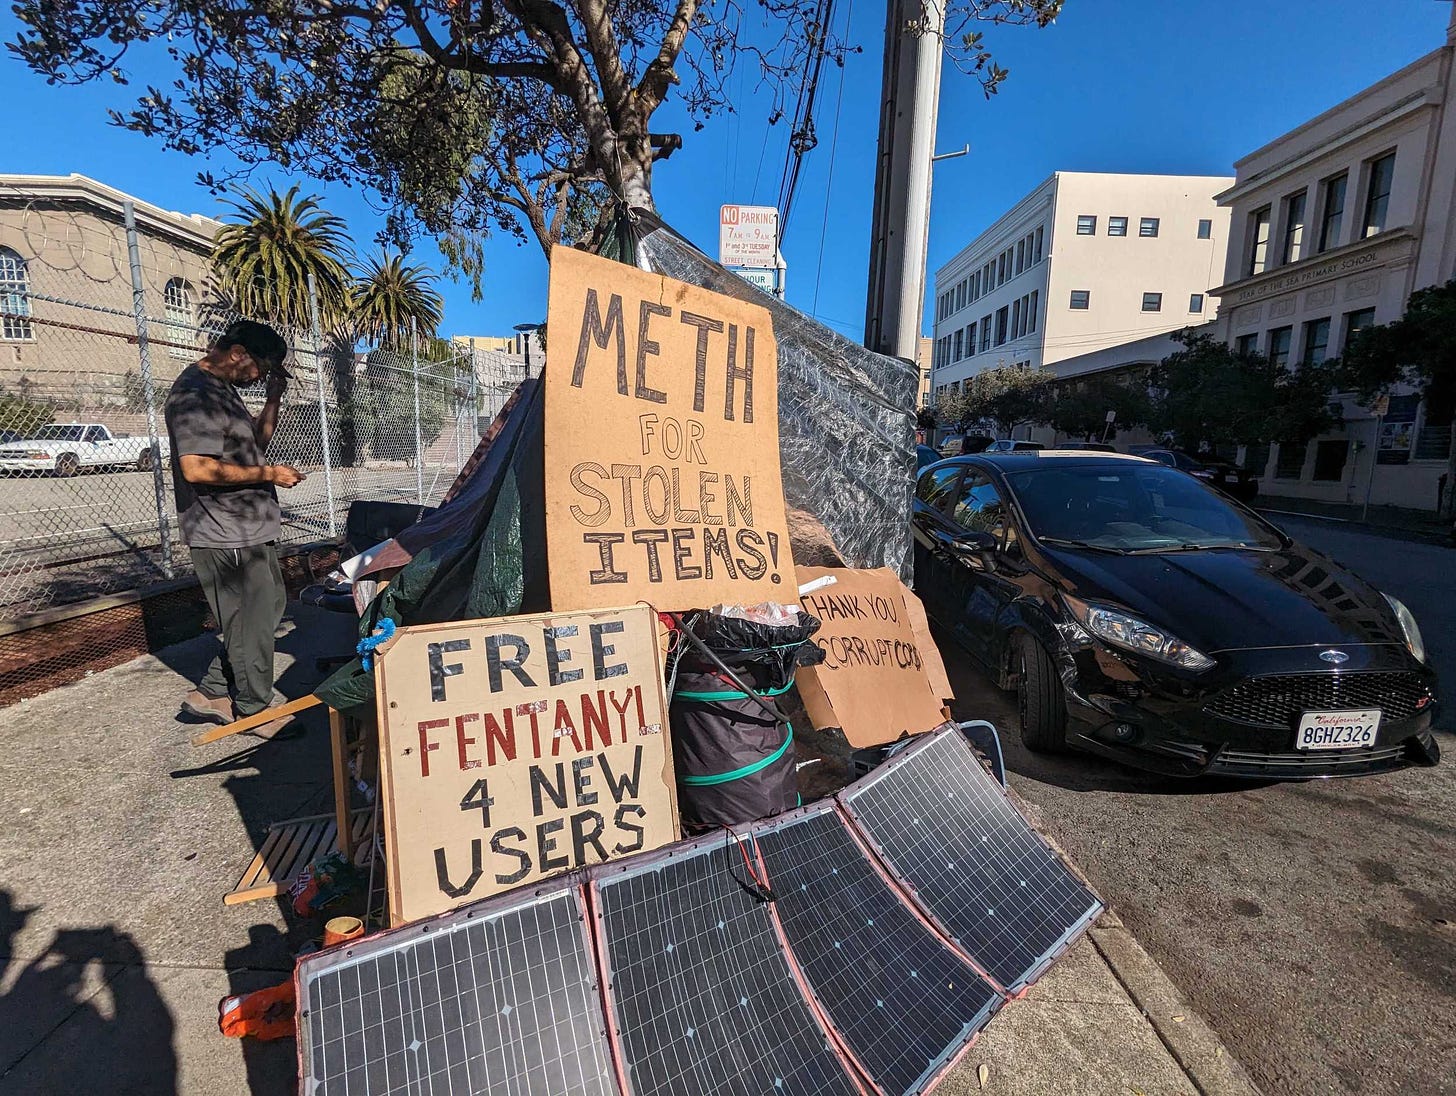 Signs reading "Meth for stolen items" and "free fentanyl 4 new users" sit atop Joseph Adam Moore